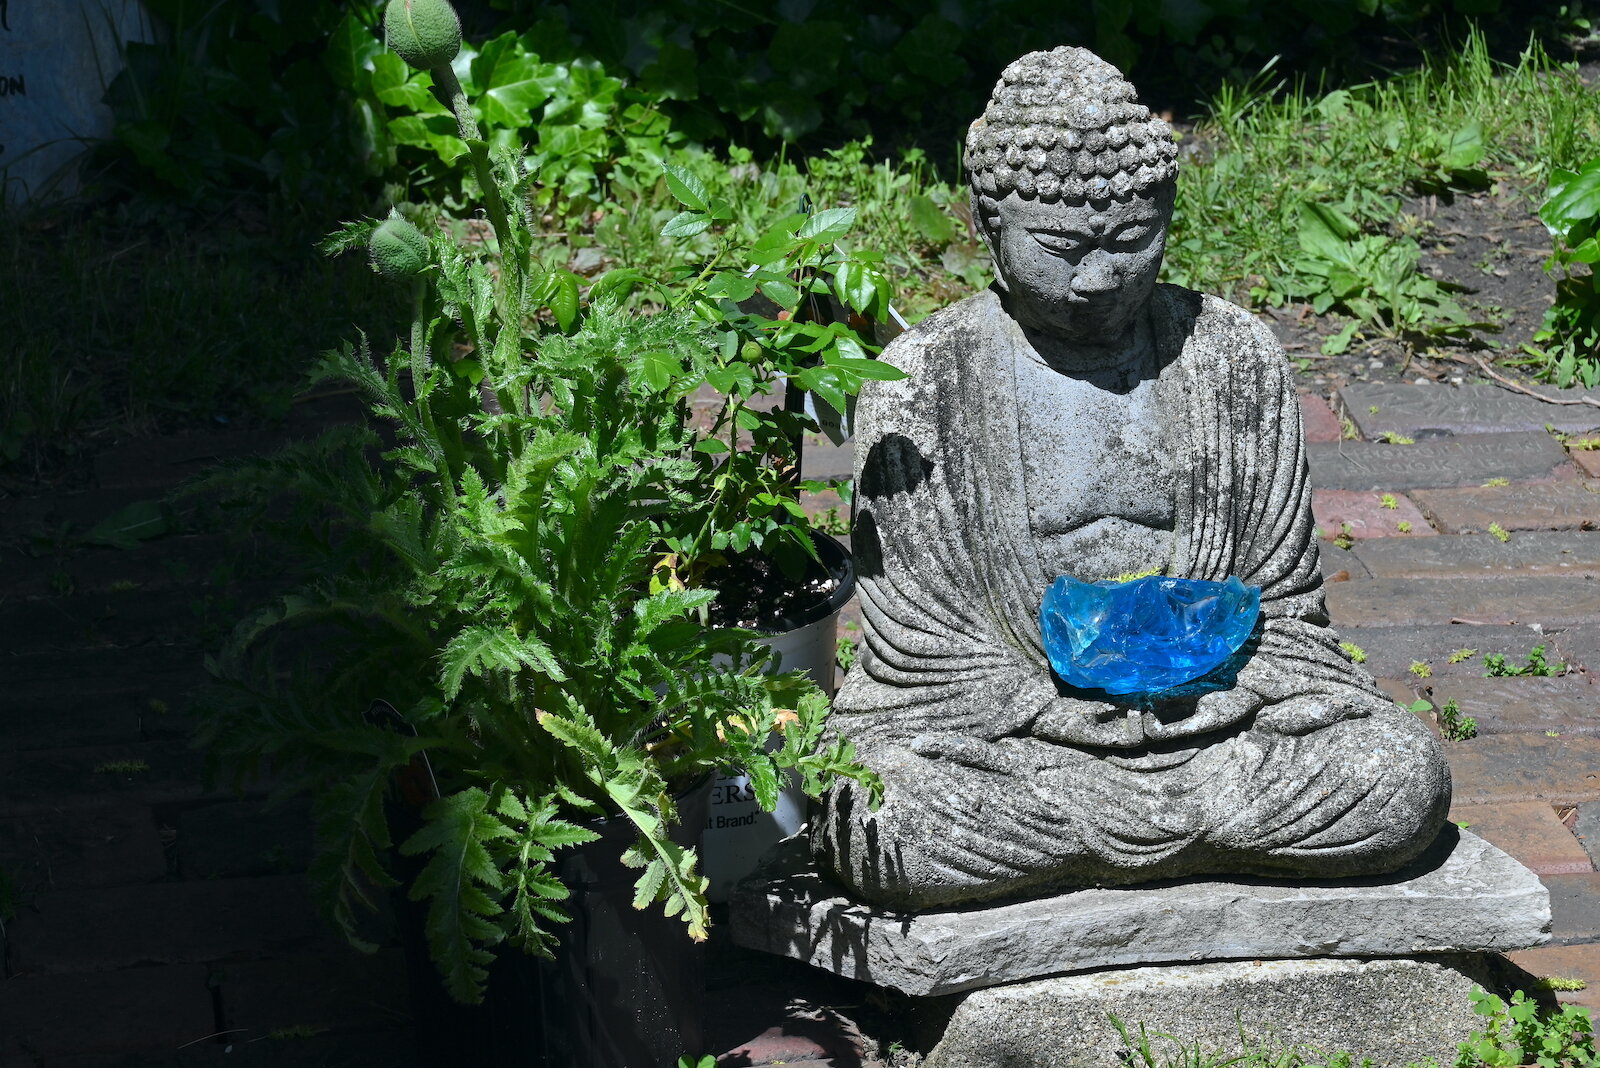 Statatues of the Buddha inside and outside the SokukoJi Buddhist Temple Monastery in Battle Creek.